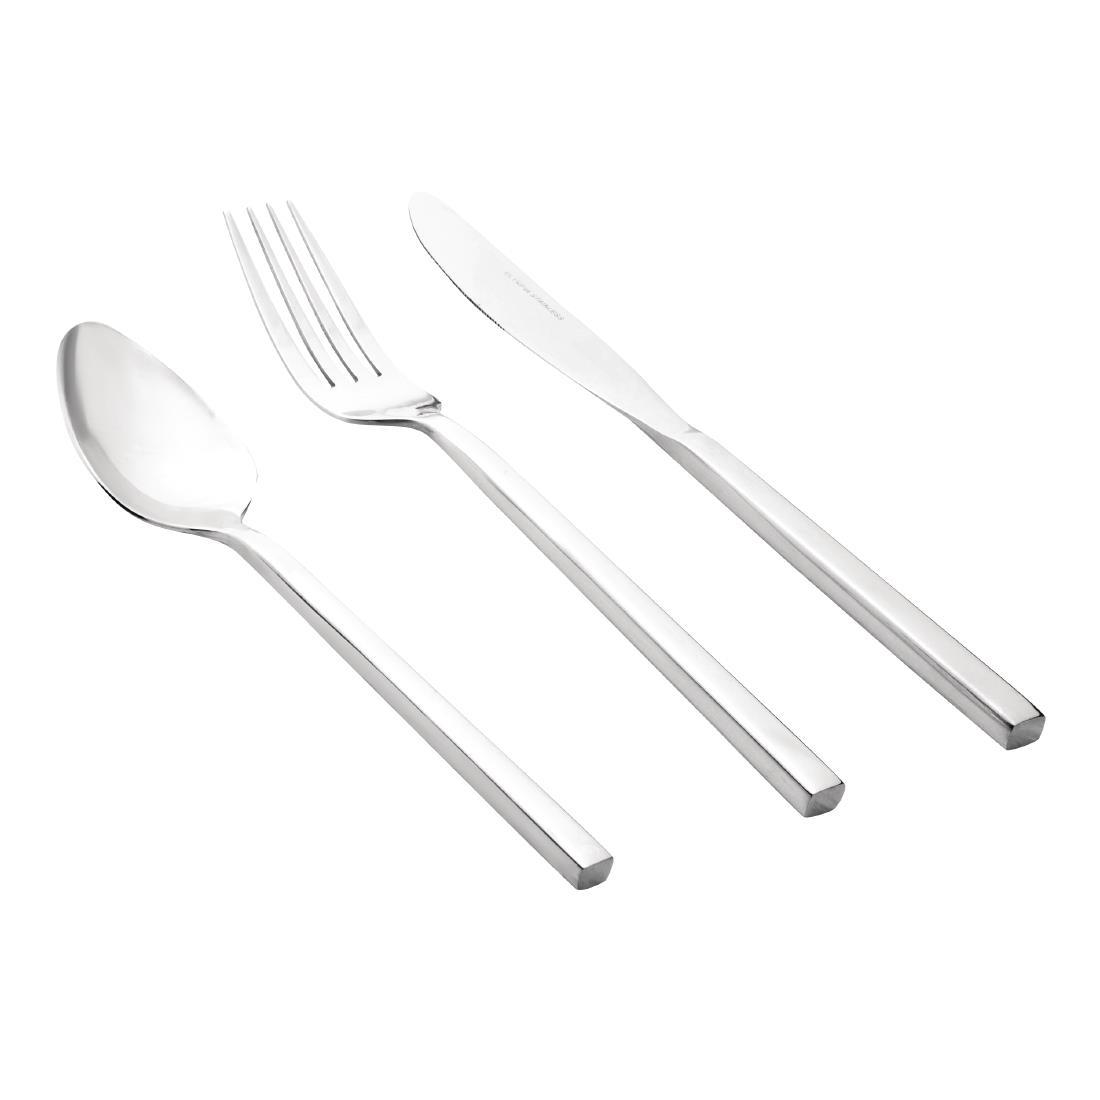 Olympia Napoli Cutlery Sample Set (Pack of 3) - CB650  - 2